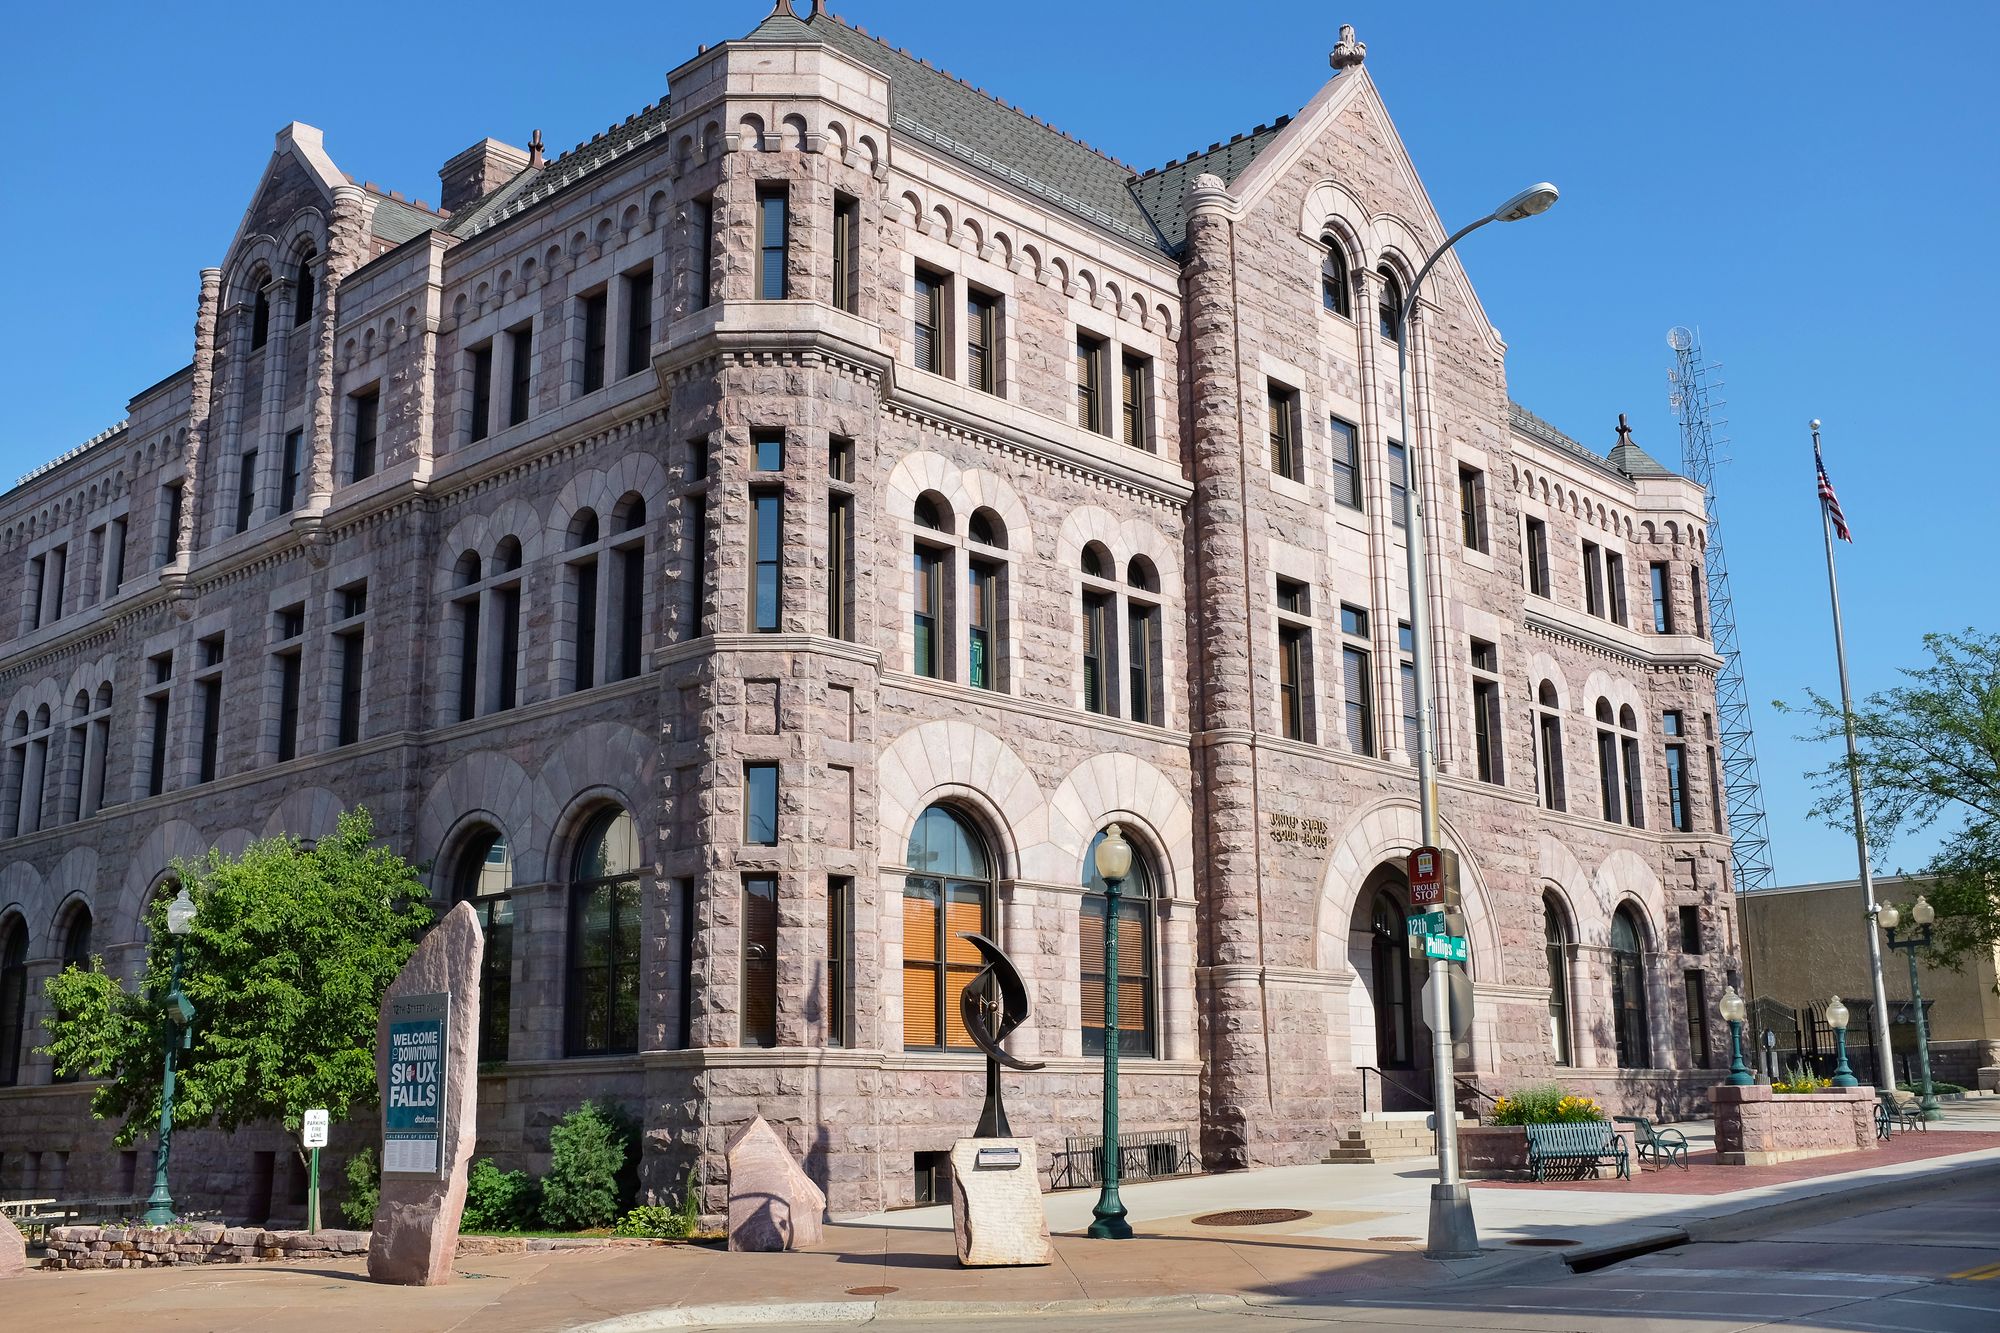 Federal courthouse in Sioux Falls, South Dakota.